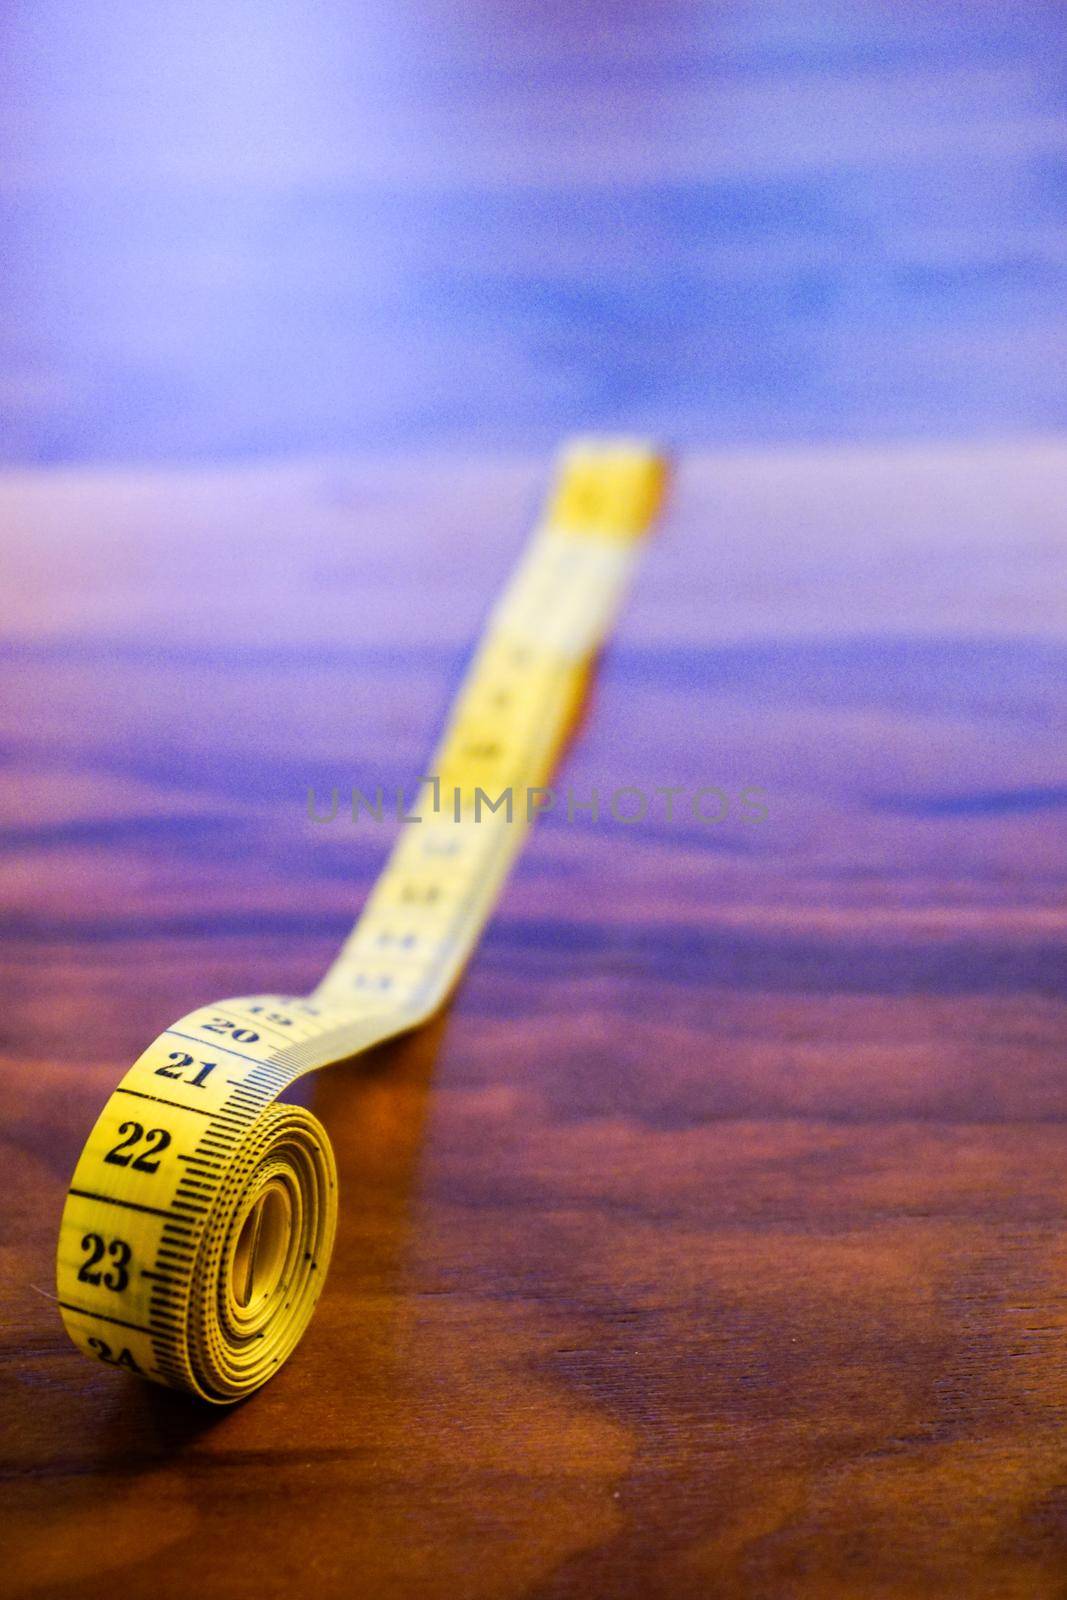 Rolled measuring tape close up view